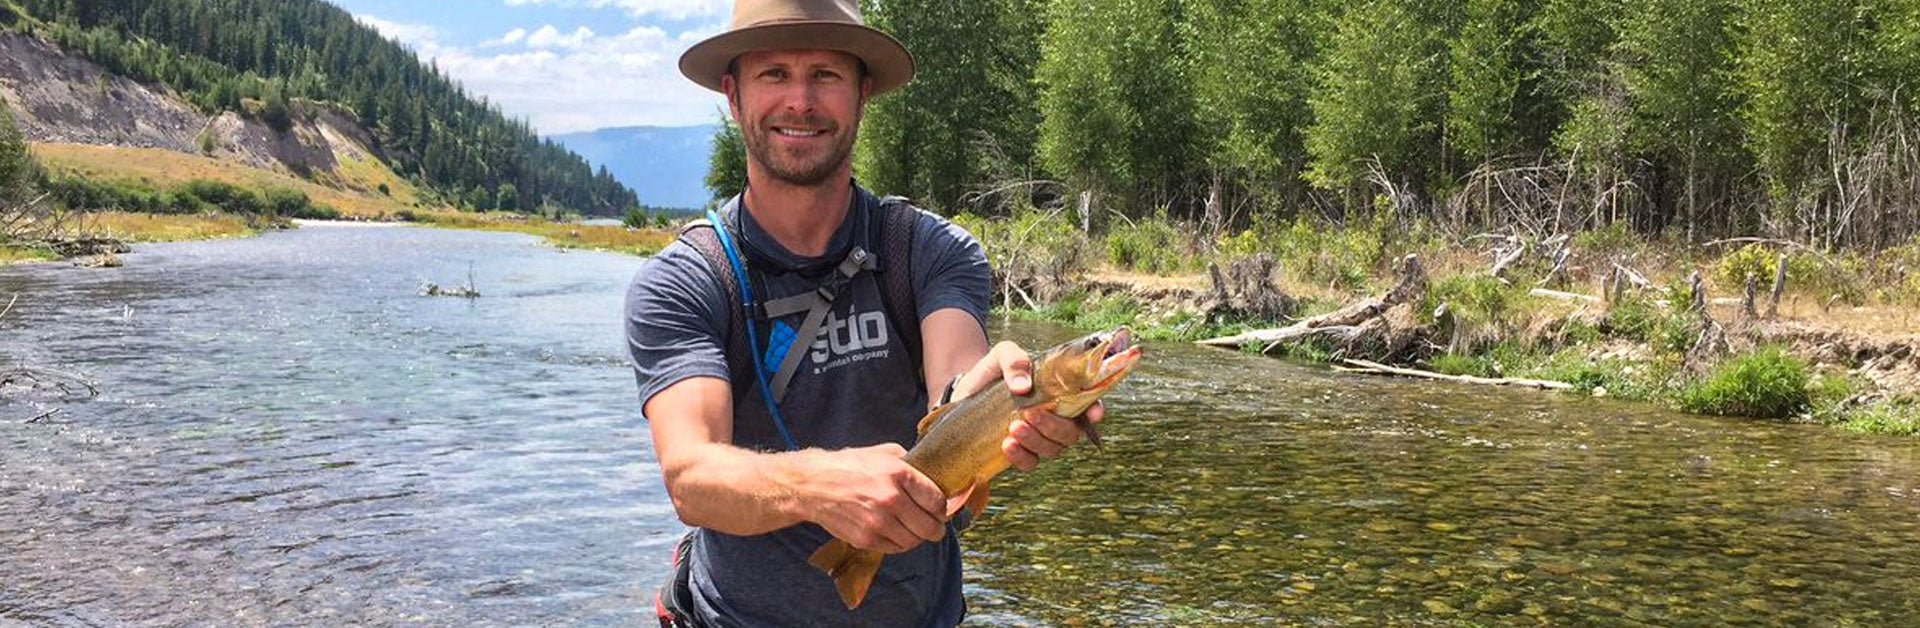 Dierks Bentley Fined for Fishing Without License